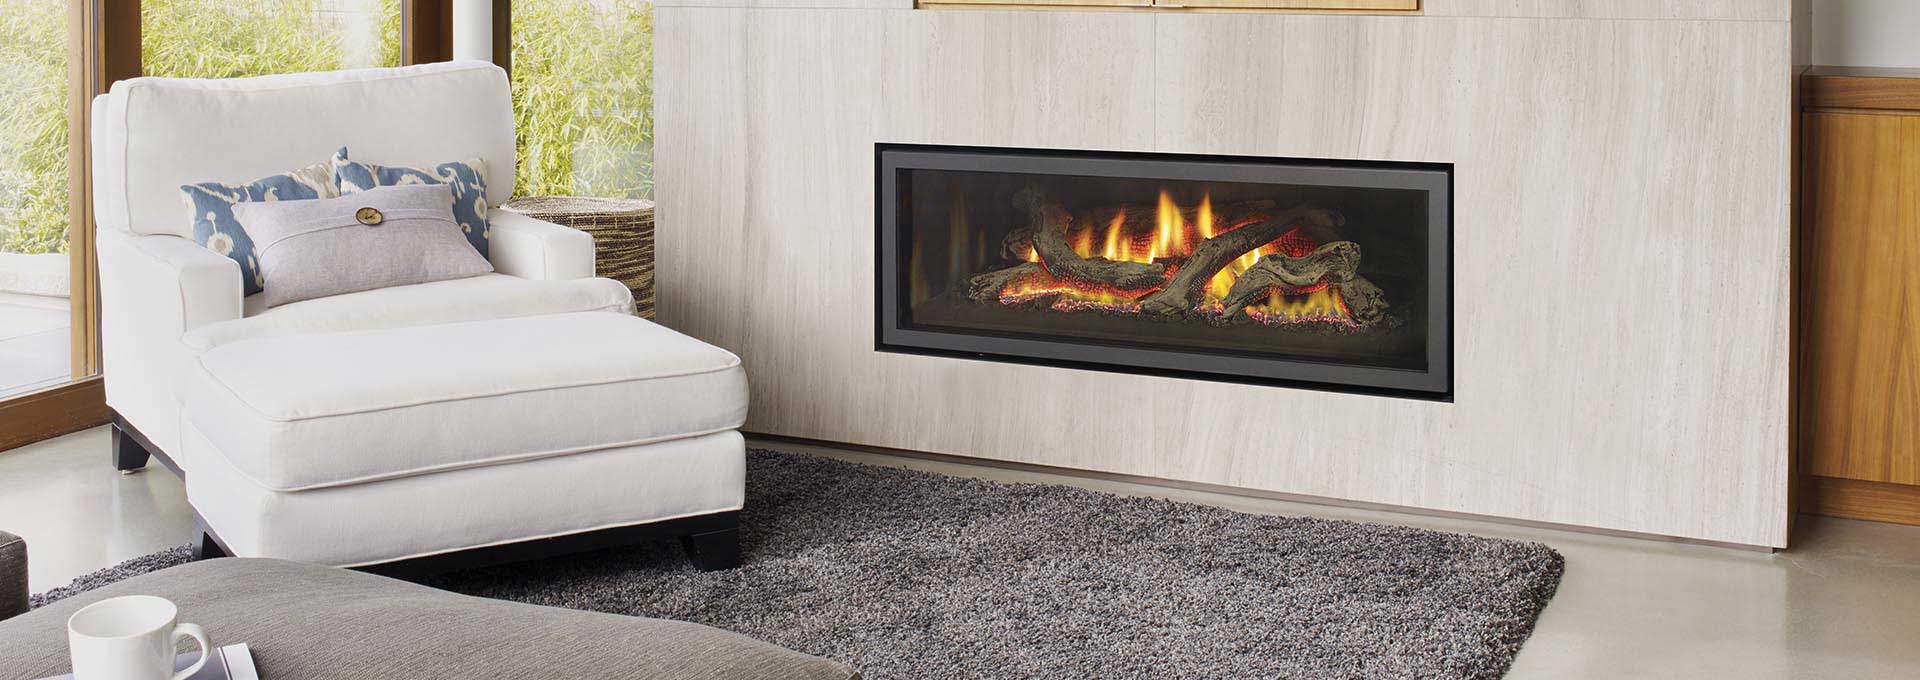 2022 Gas Fireplace Trends – Your Guide to Fireplace Design 